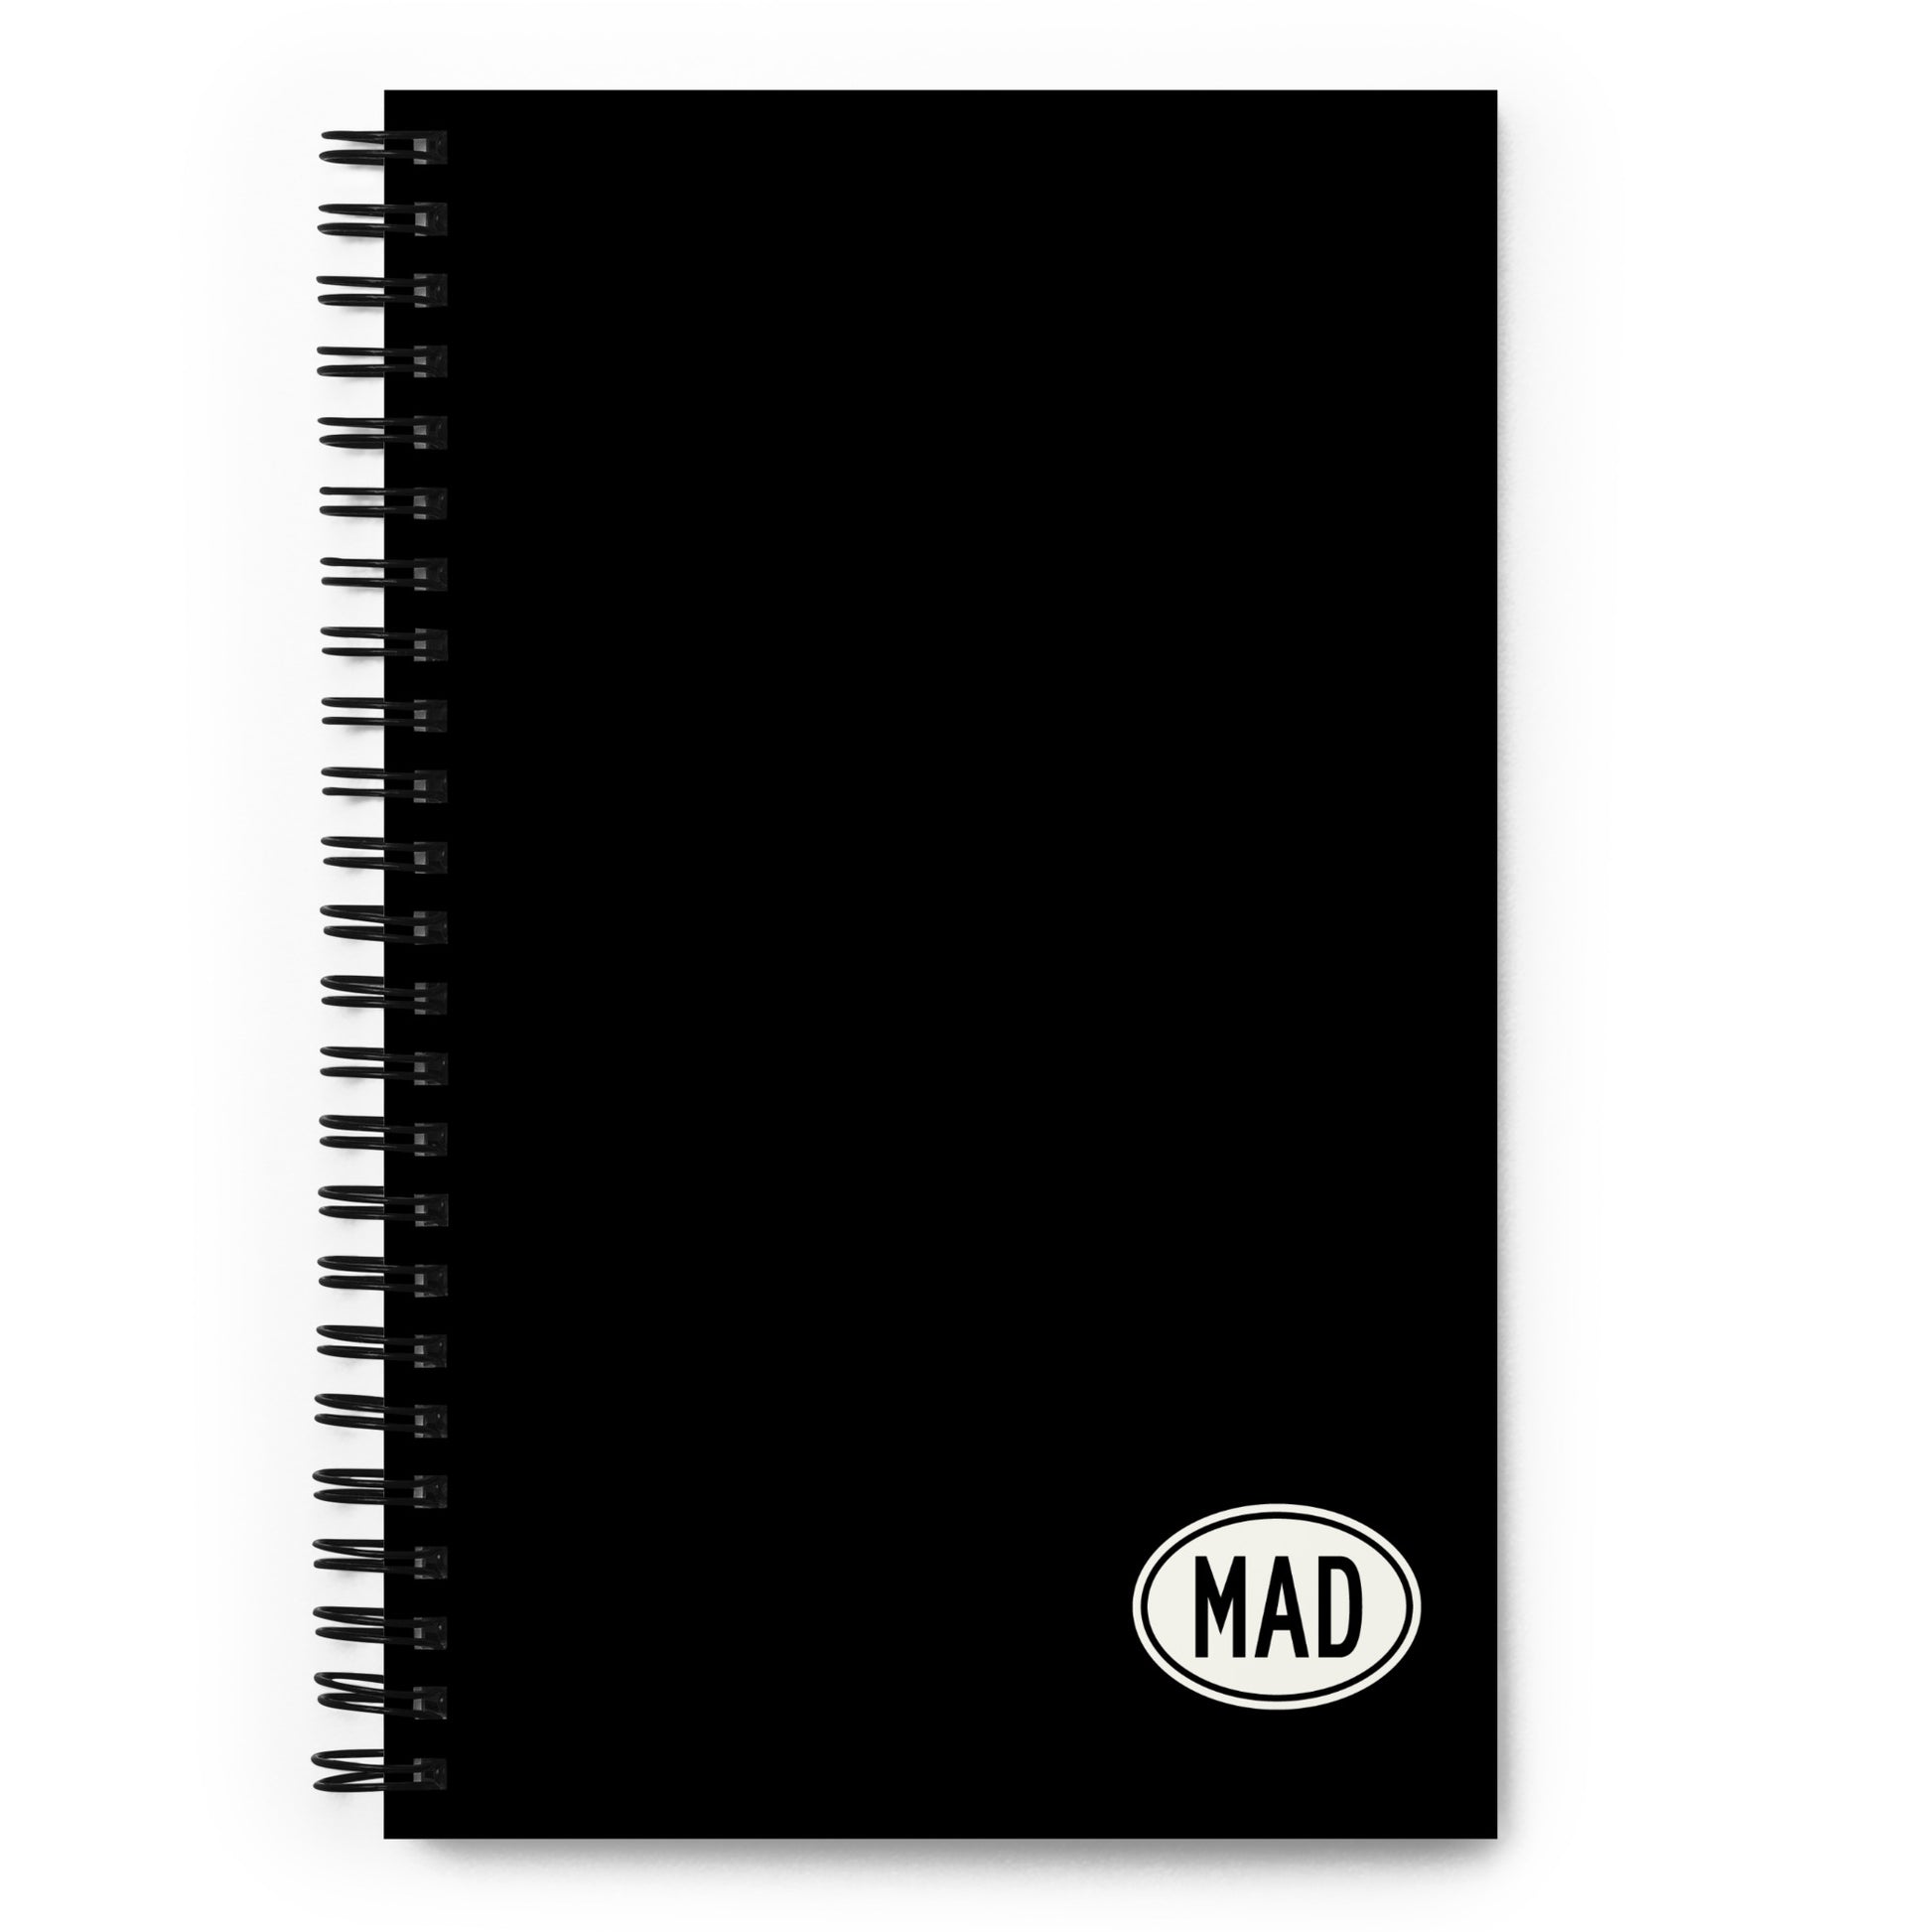 Unique Travel Gift Spiral Notebook - White Oval • MAD Madrid • YHM Designs - Image 01